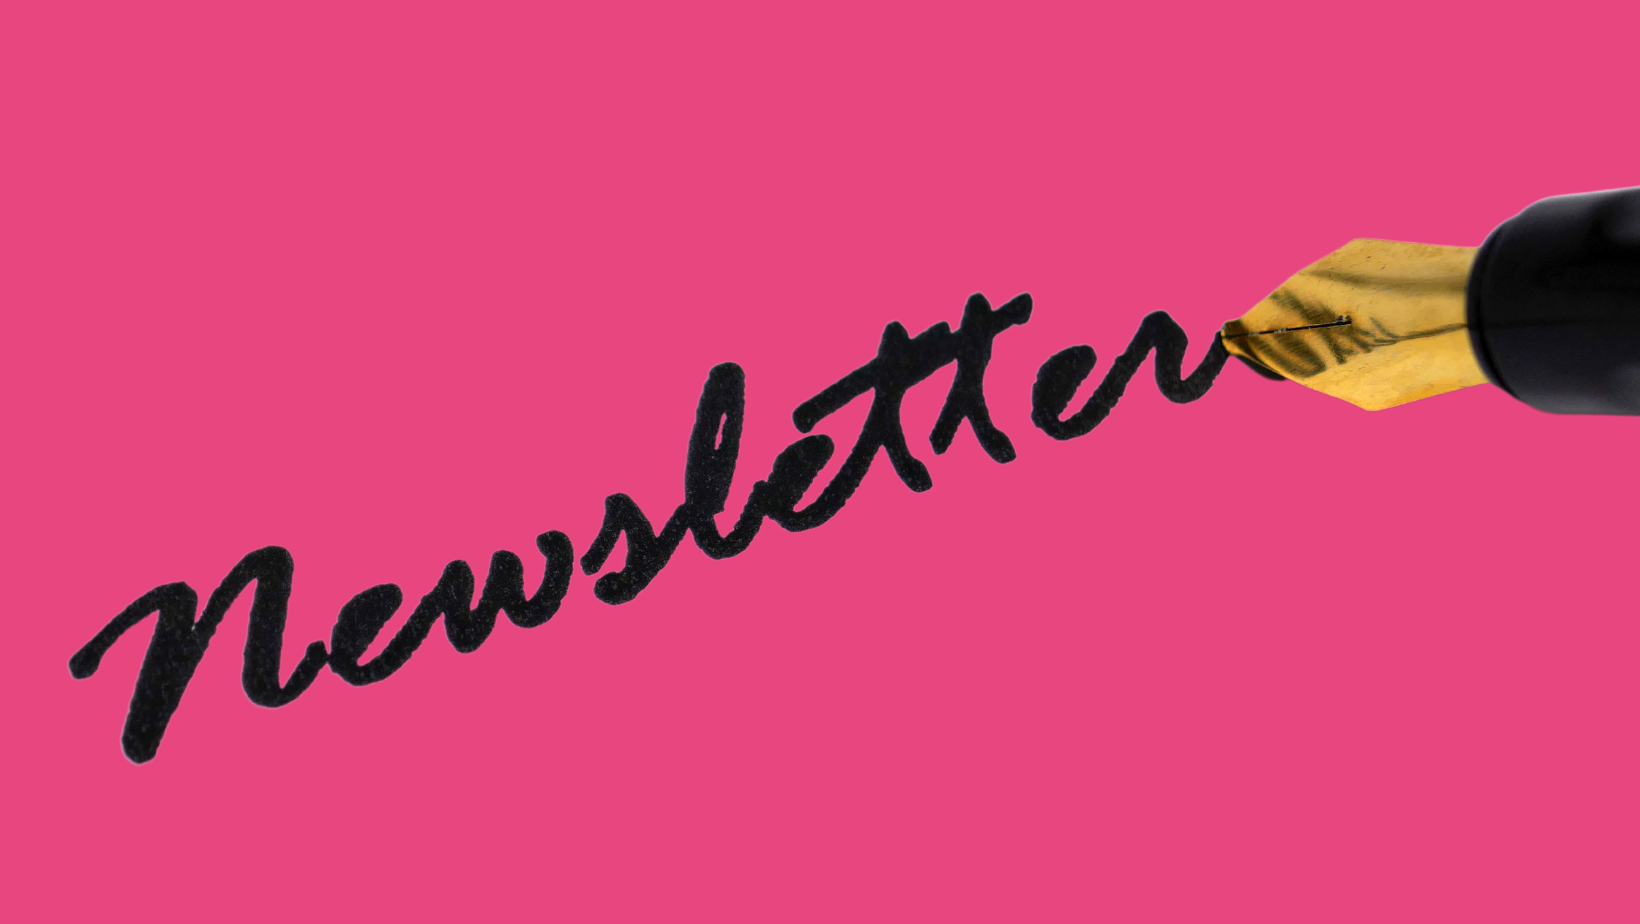 Cursive writing reads newsletter with fountain pen nib in black on pink background